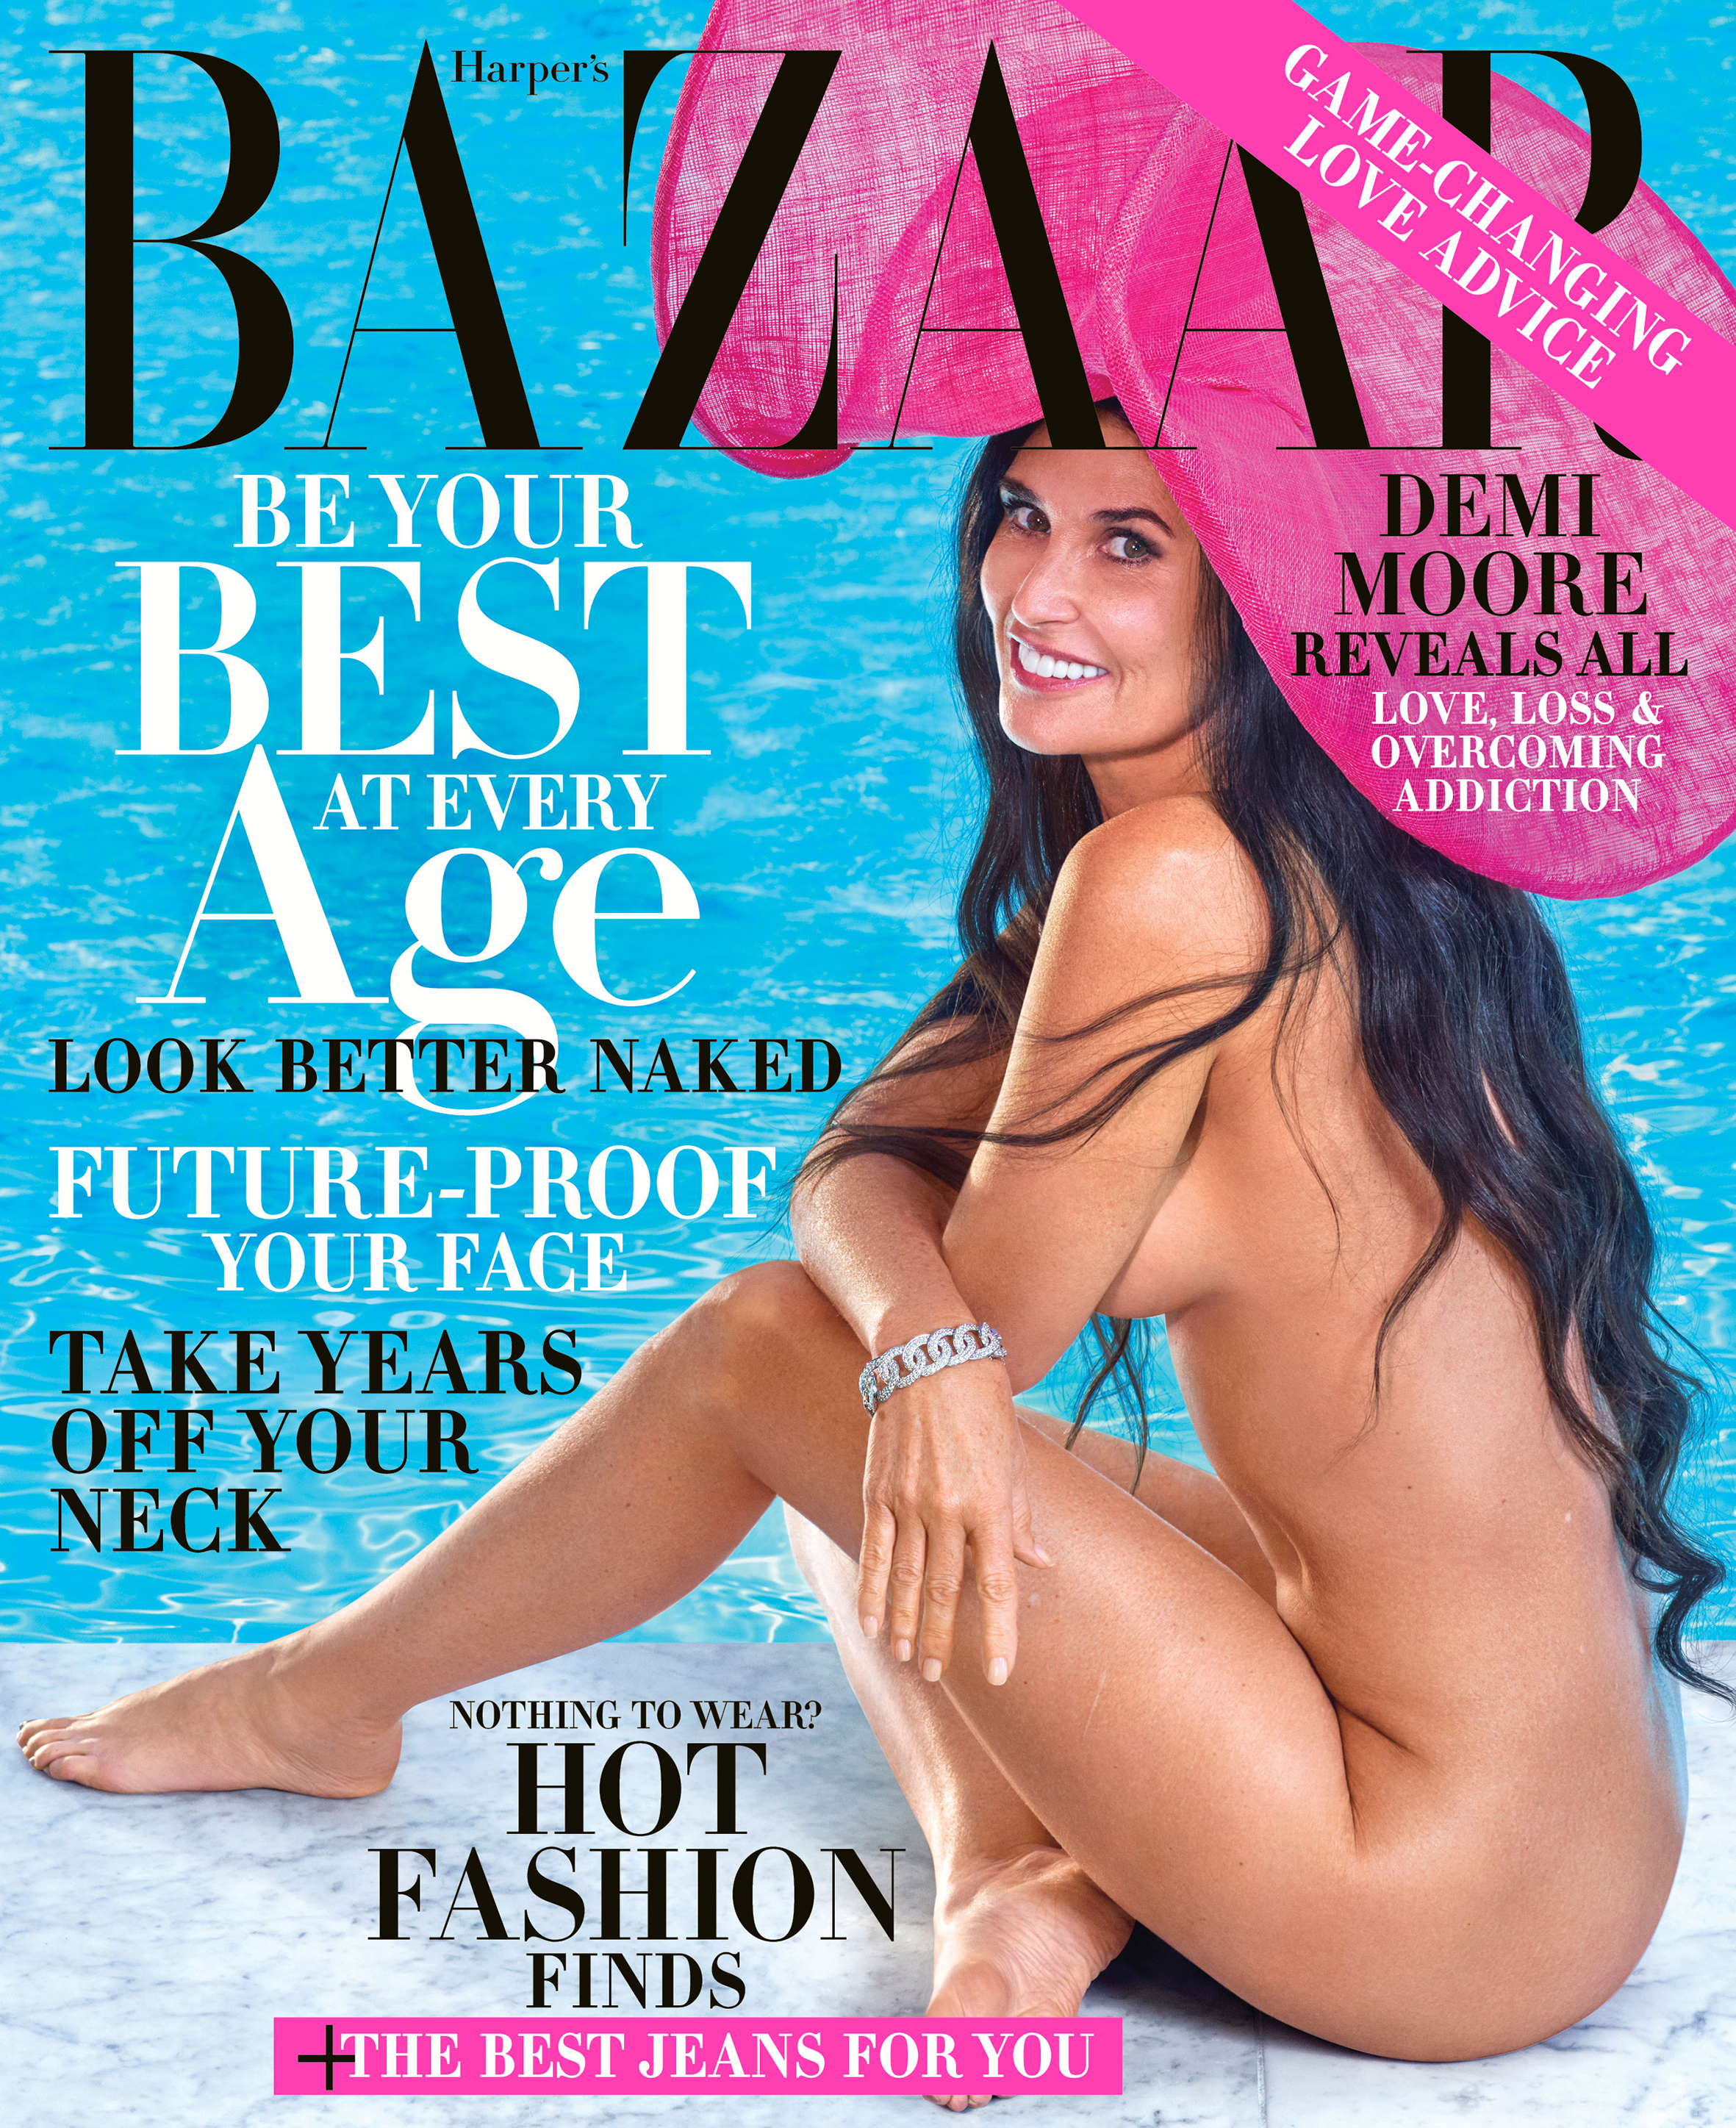 Demi Moore Nude Pregnant - Demi Moore Poses Nude on 'Harper's Bazaar' October Issue 2019